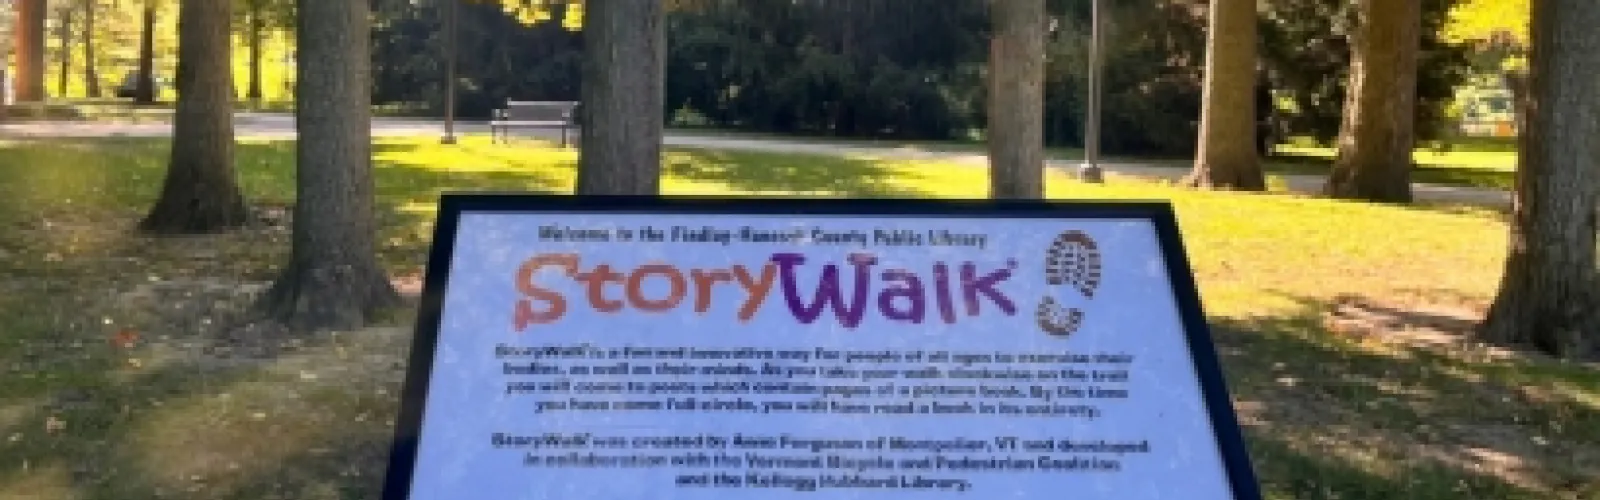 storywalk sign in the park